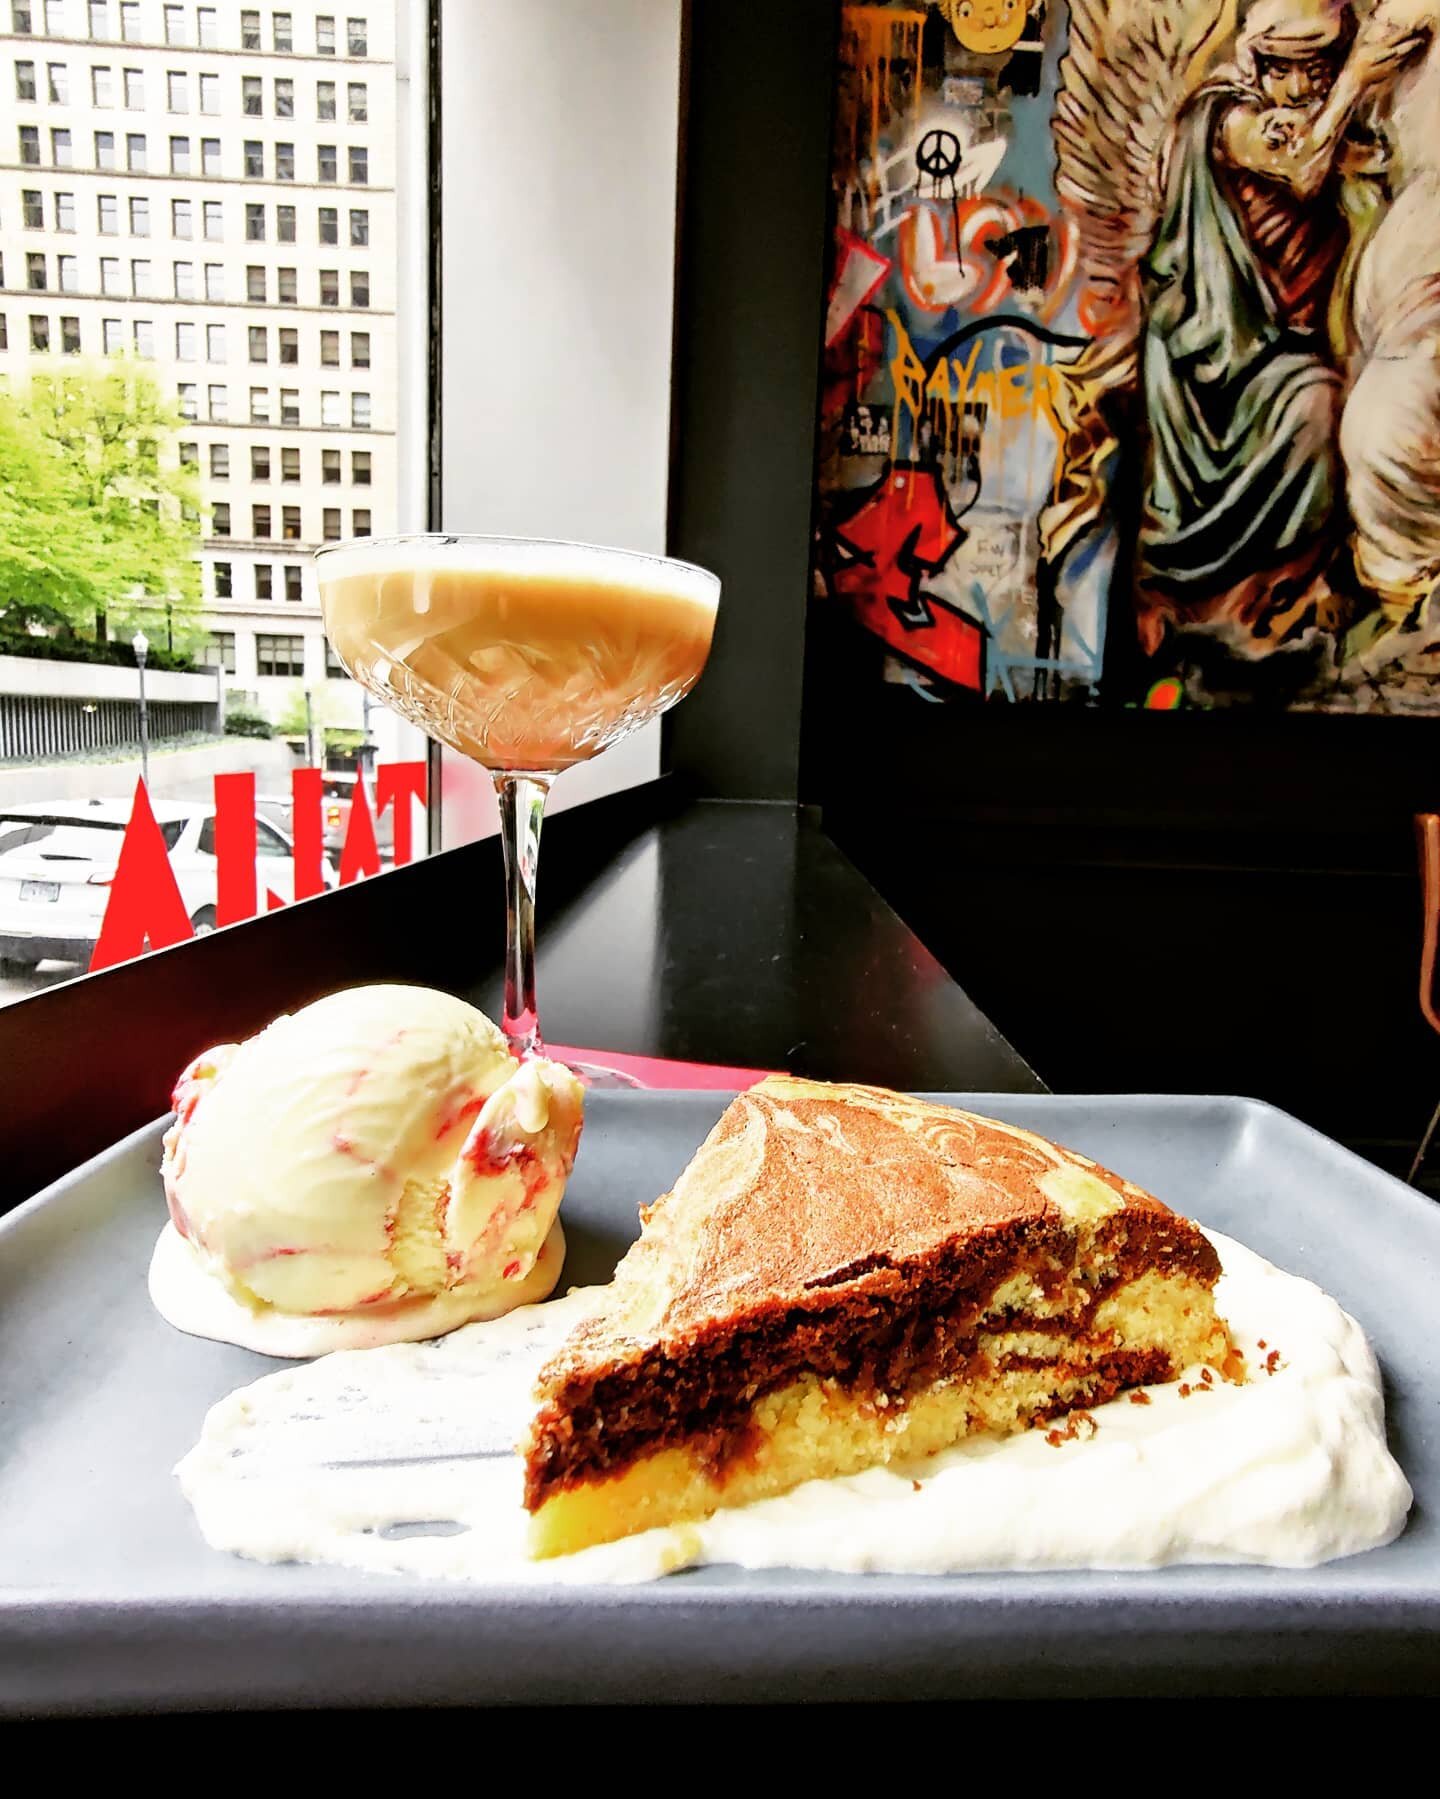 New deserts at Talia! 🍧🍰
🍋Lemon chocolate marble cake along side a lemon raspberry swirled gelato or finish off your meal with one of our famous espresso martinis!
.
.
Featured art work created by local Pittsburgh artist @jeremymraymer 
.
.
.
#des